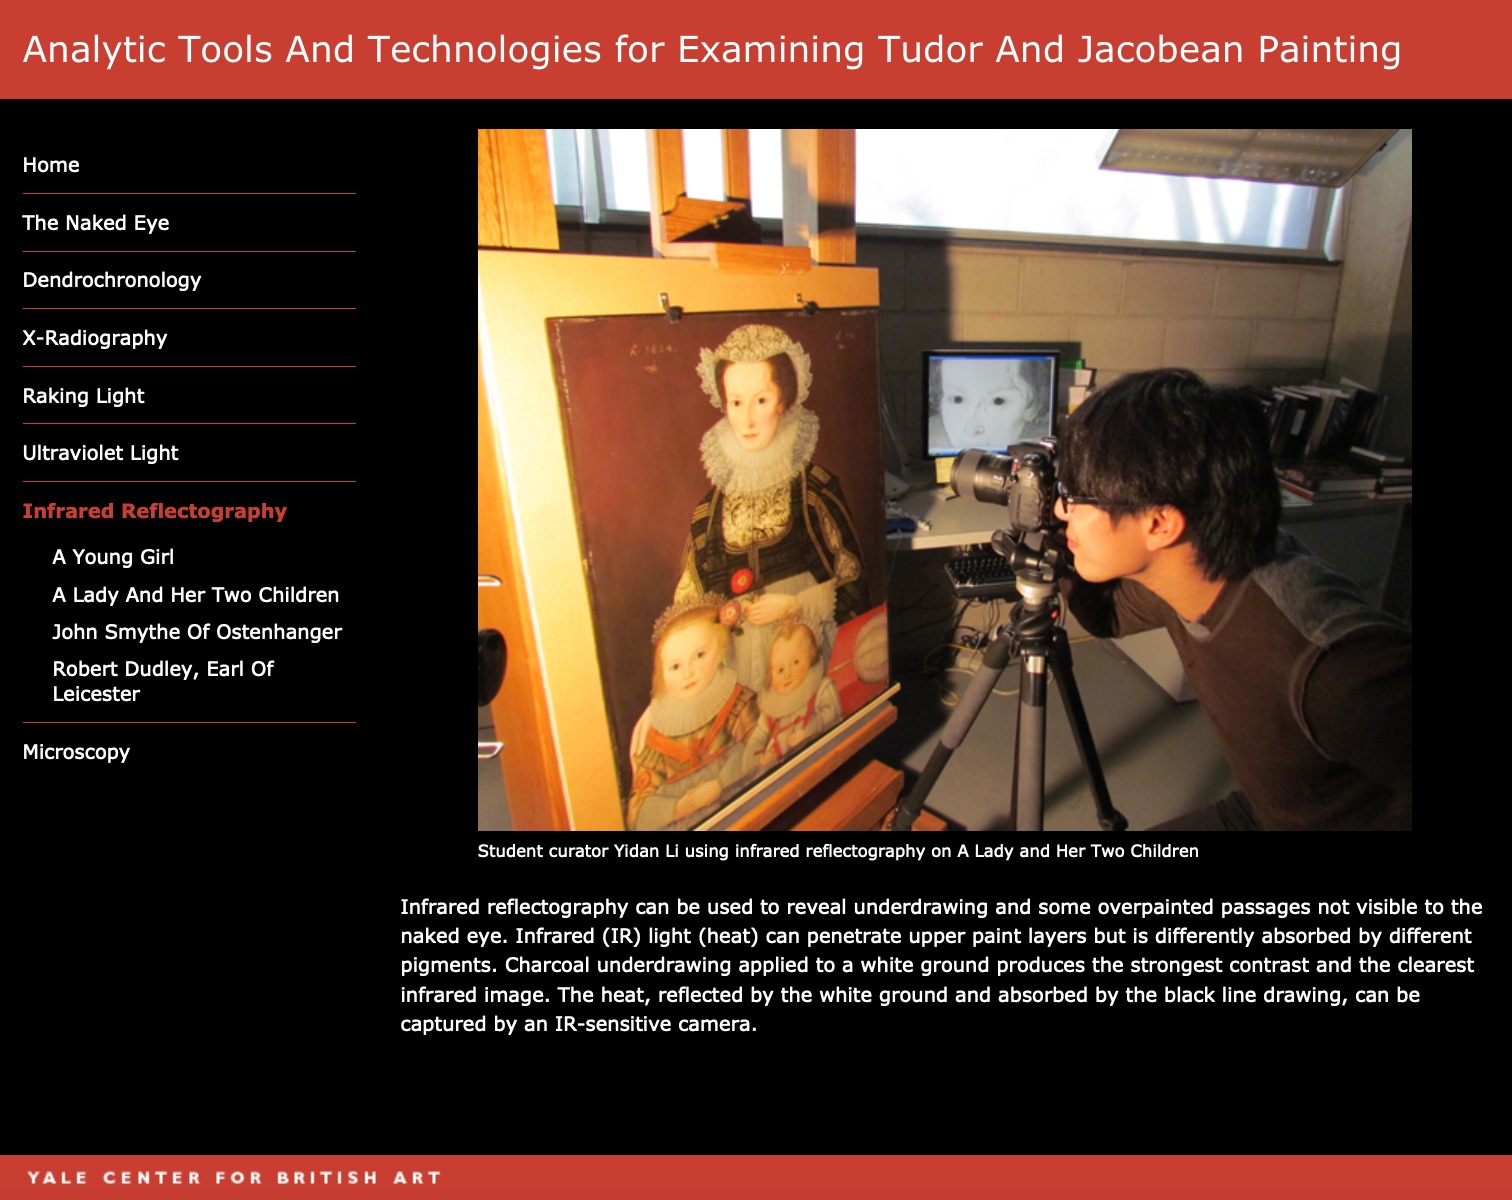 Student curator Yidan Li using infrared reflectography on ‘A Lady and Her Two Children’